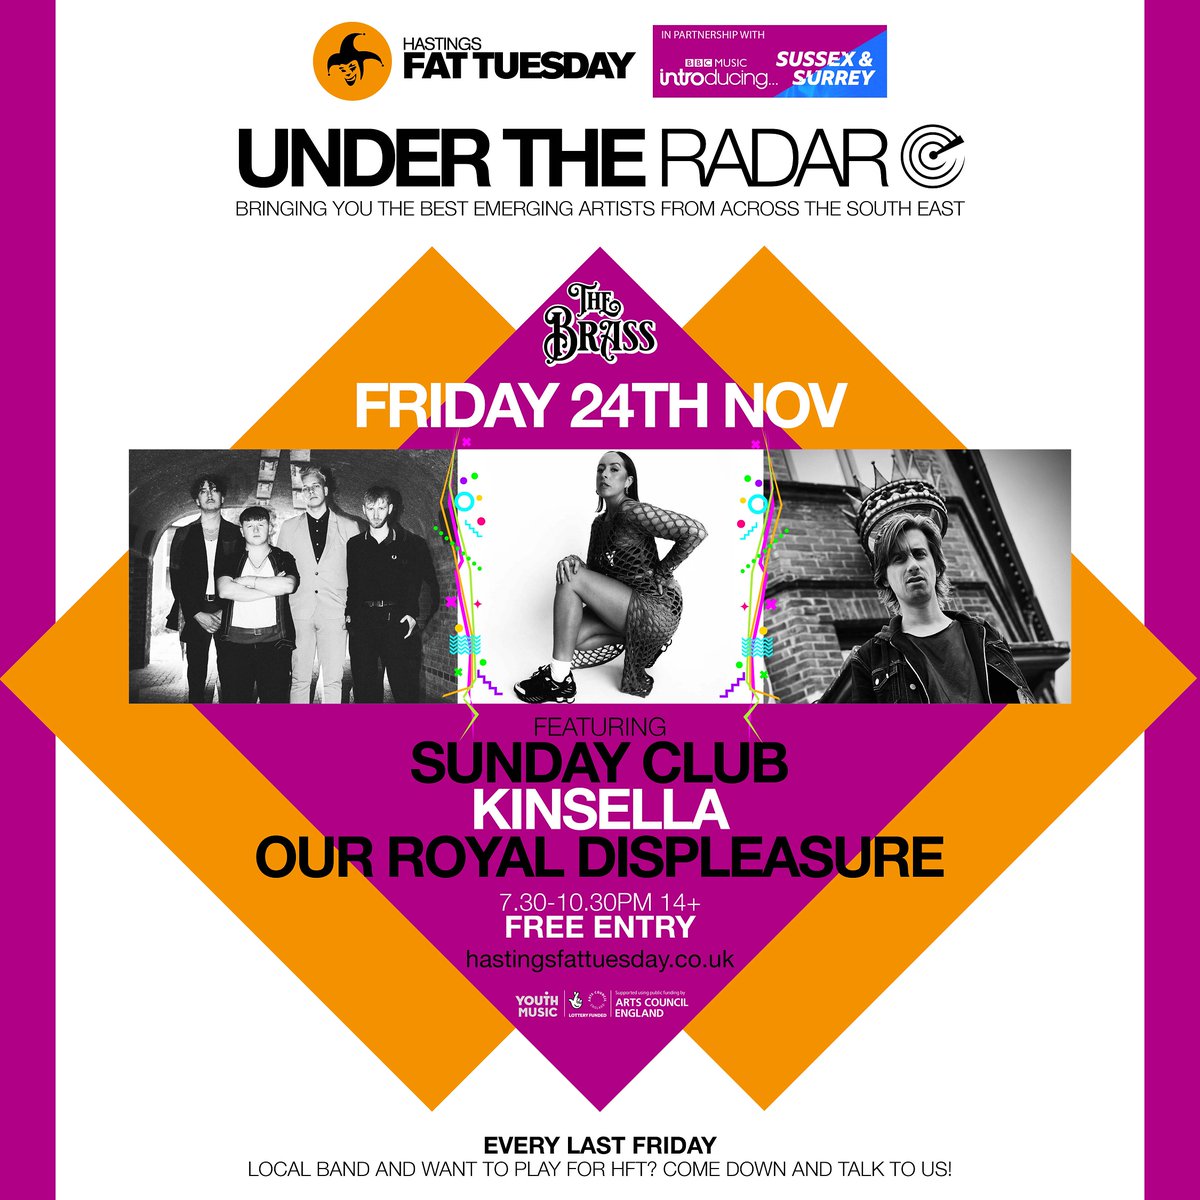 Join us for our final Under the Radar at The Brass before it closes at the end of the year! FRIDAY NOVEMBER 24TH 7.30-10.30pm FREE ENTRY 14+ @BBCIntroSouth #1066musiccity @Visit1066